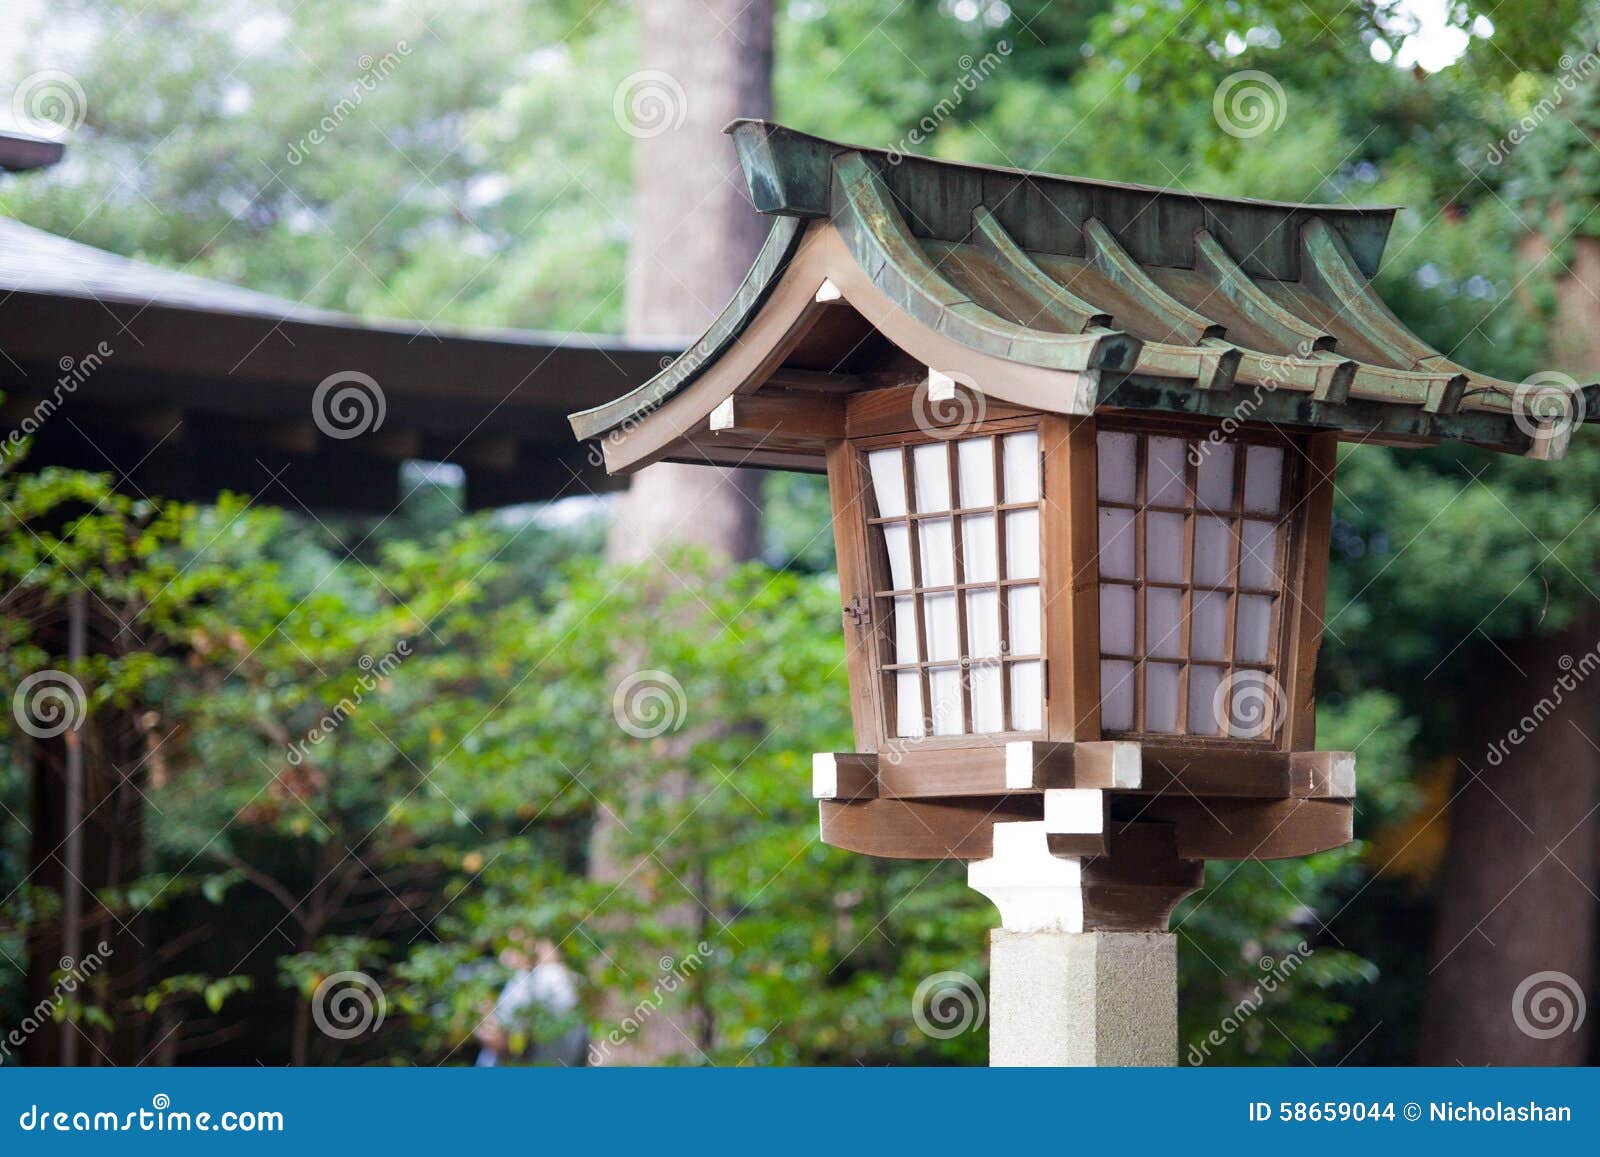 Lamp in temple , Japan stock photo. Image of pole, kyoto - 58659044